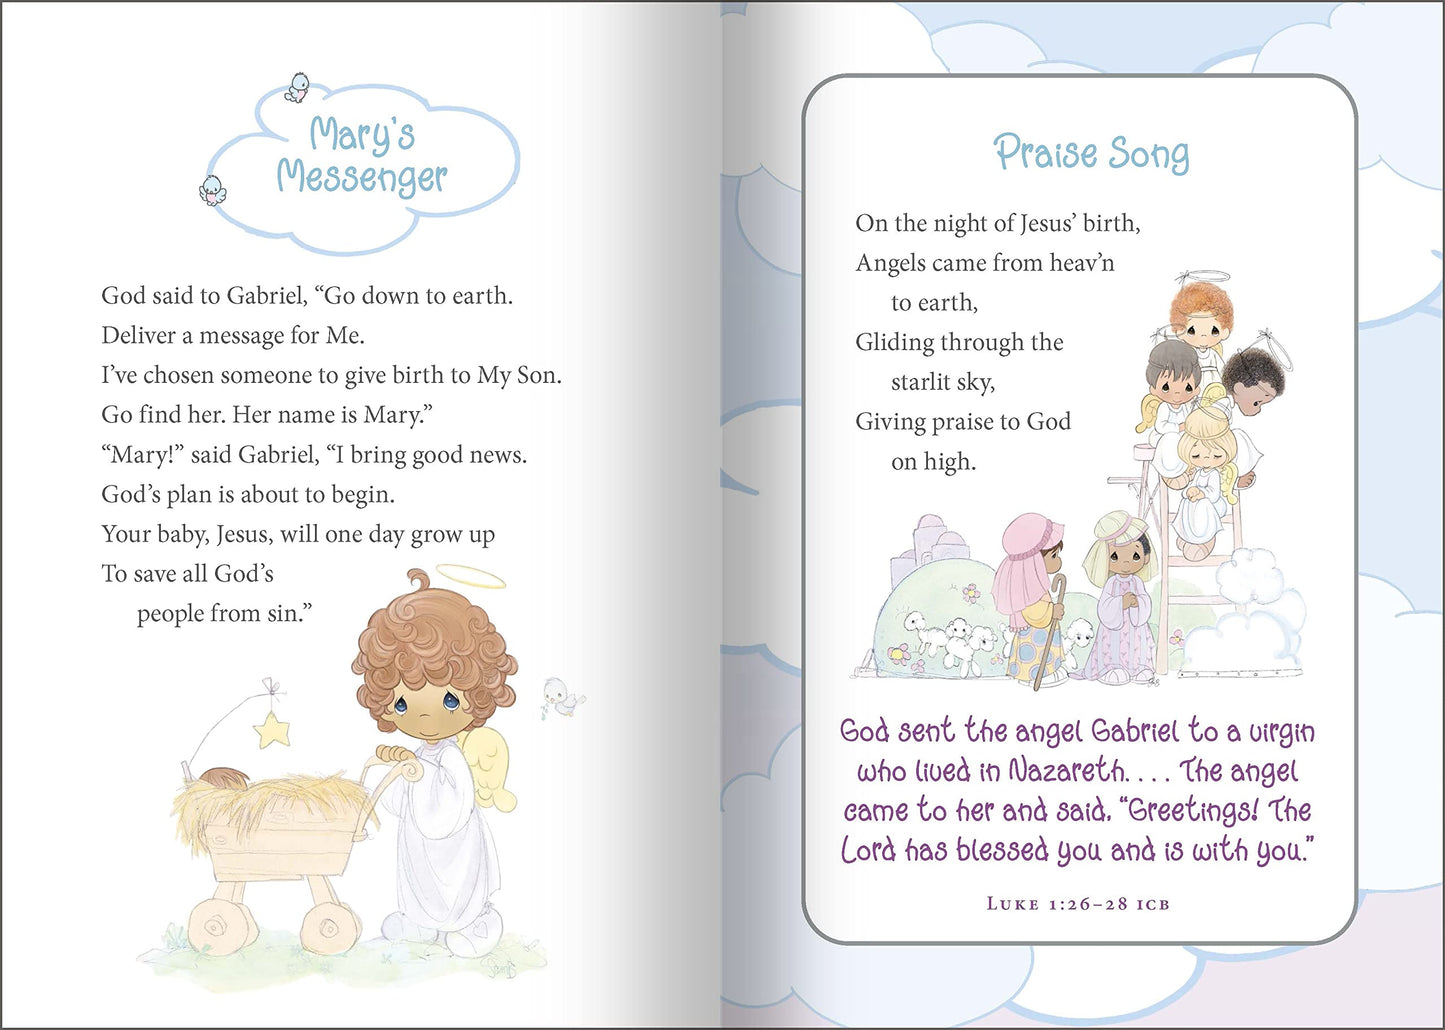 Precious Moments Little Book of Angels